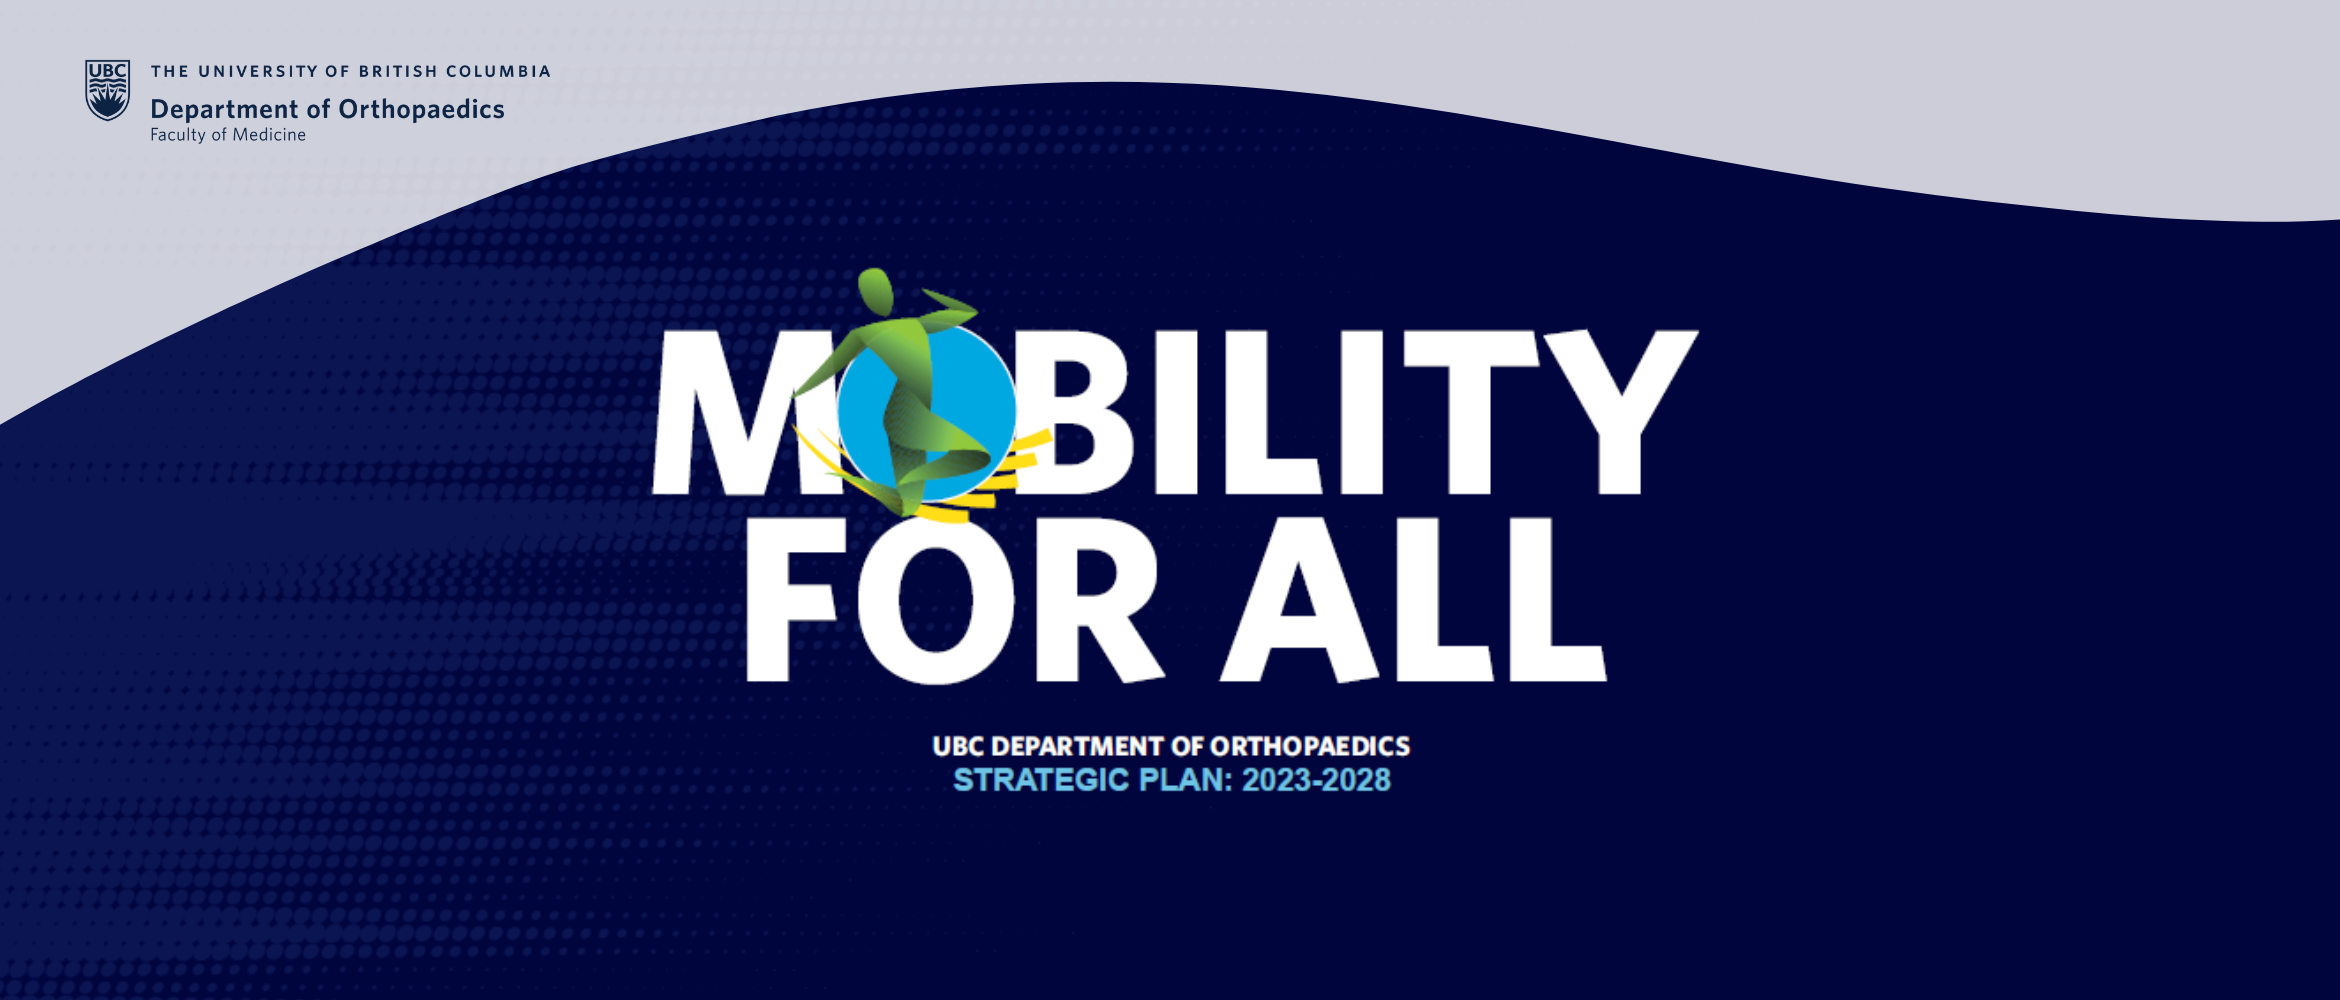 UBC Orthopaedics Launches New Strategic Plan: Mobility for All, 2023-2028